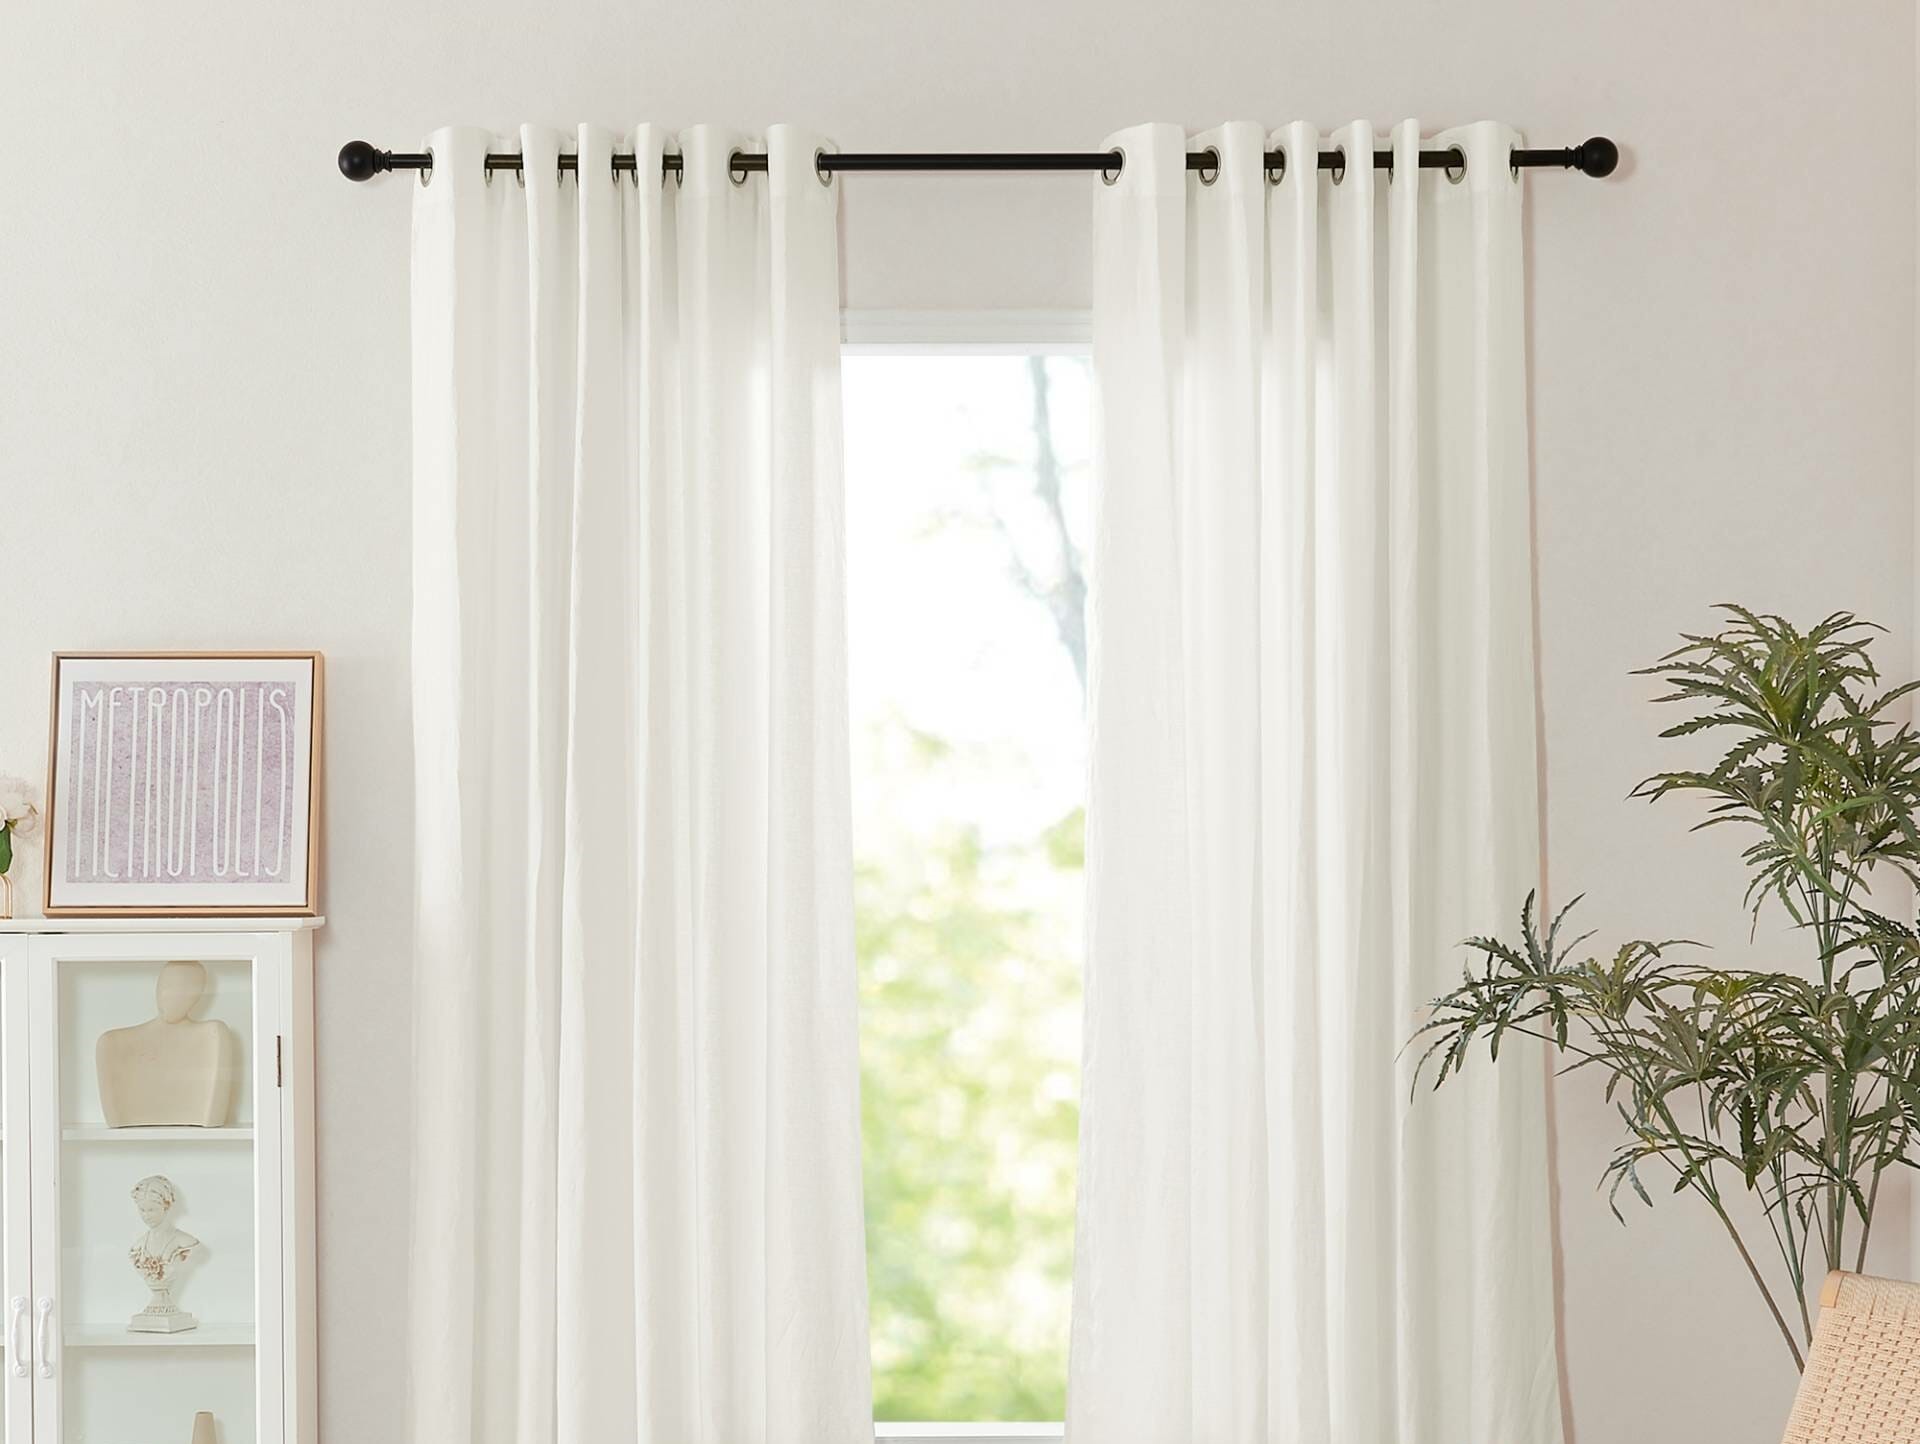 What Should be the Curtain Rod Color for White Curtains